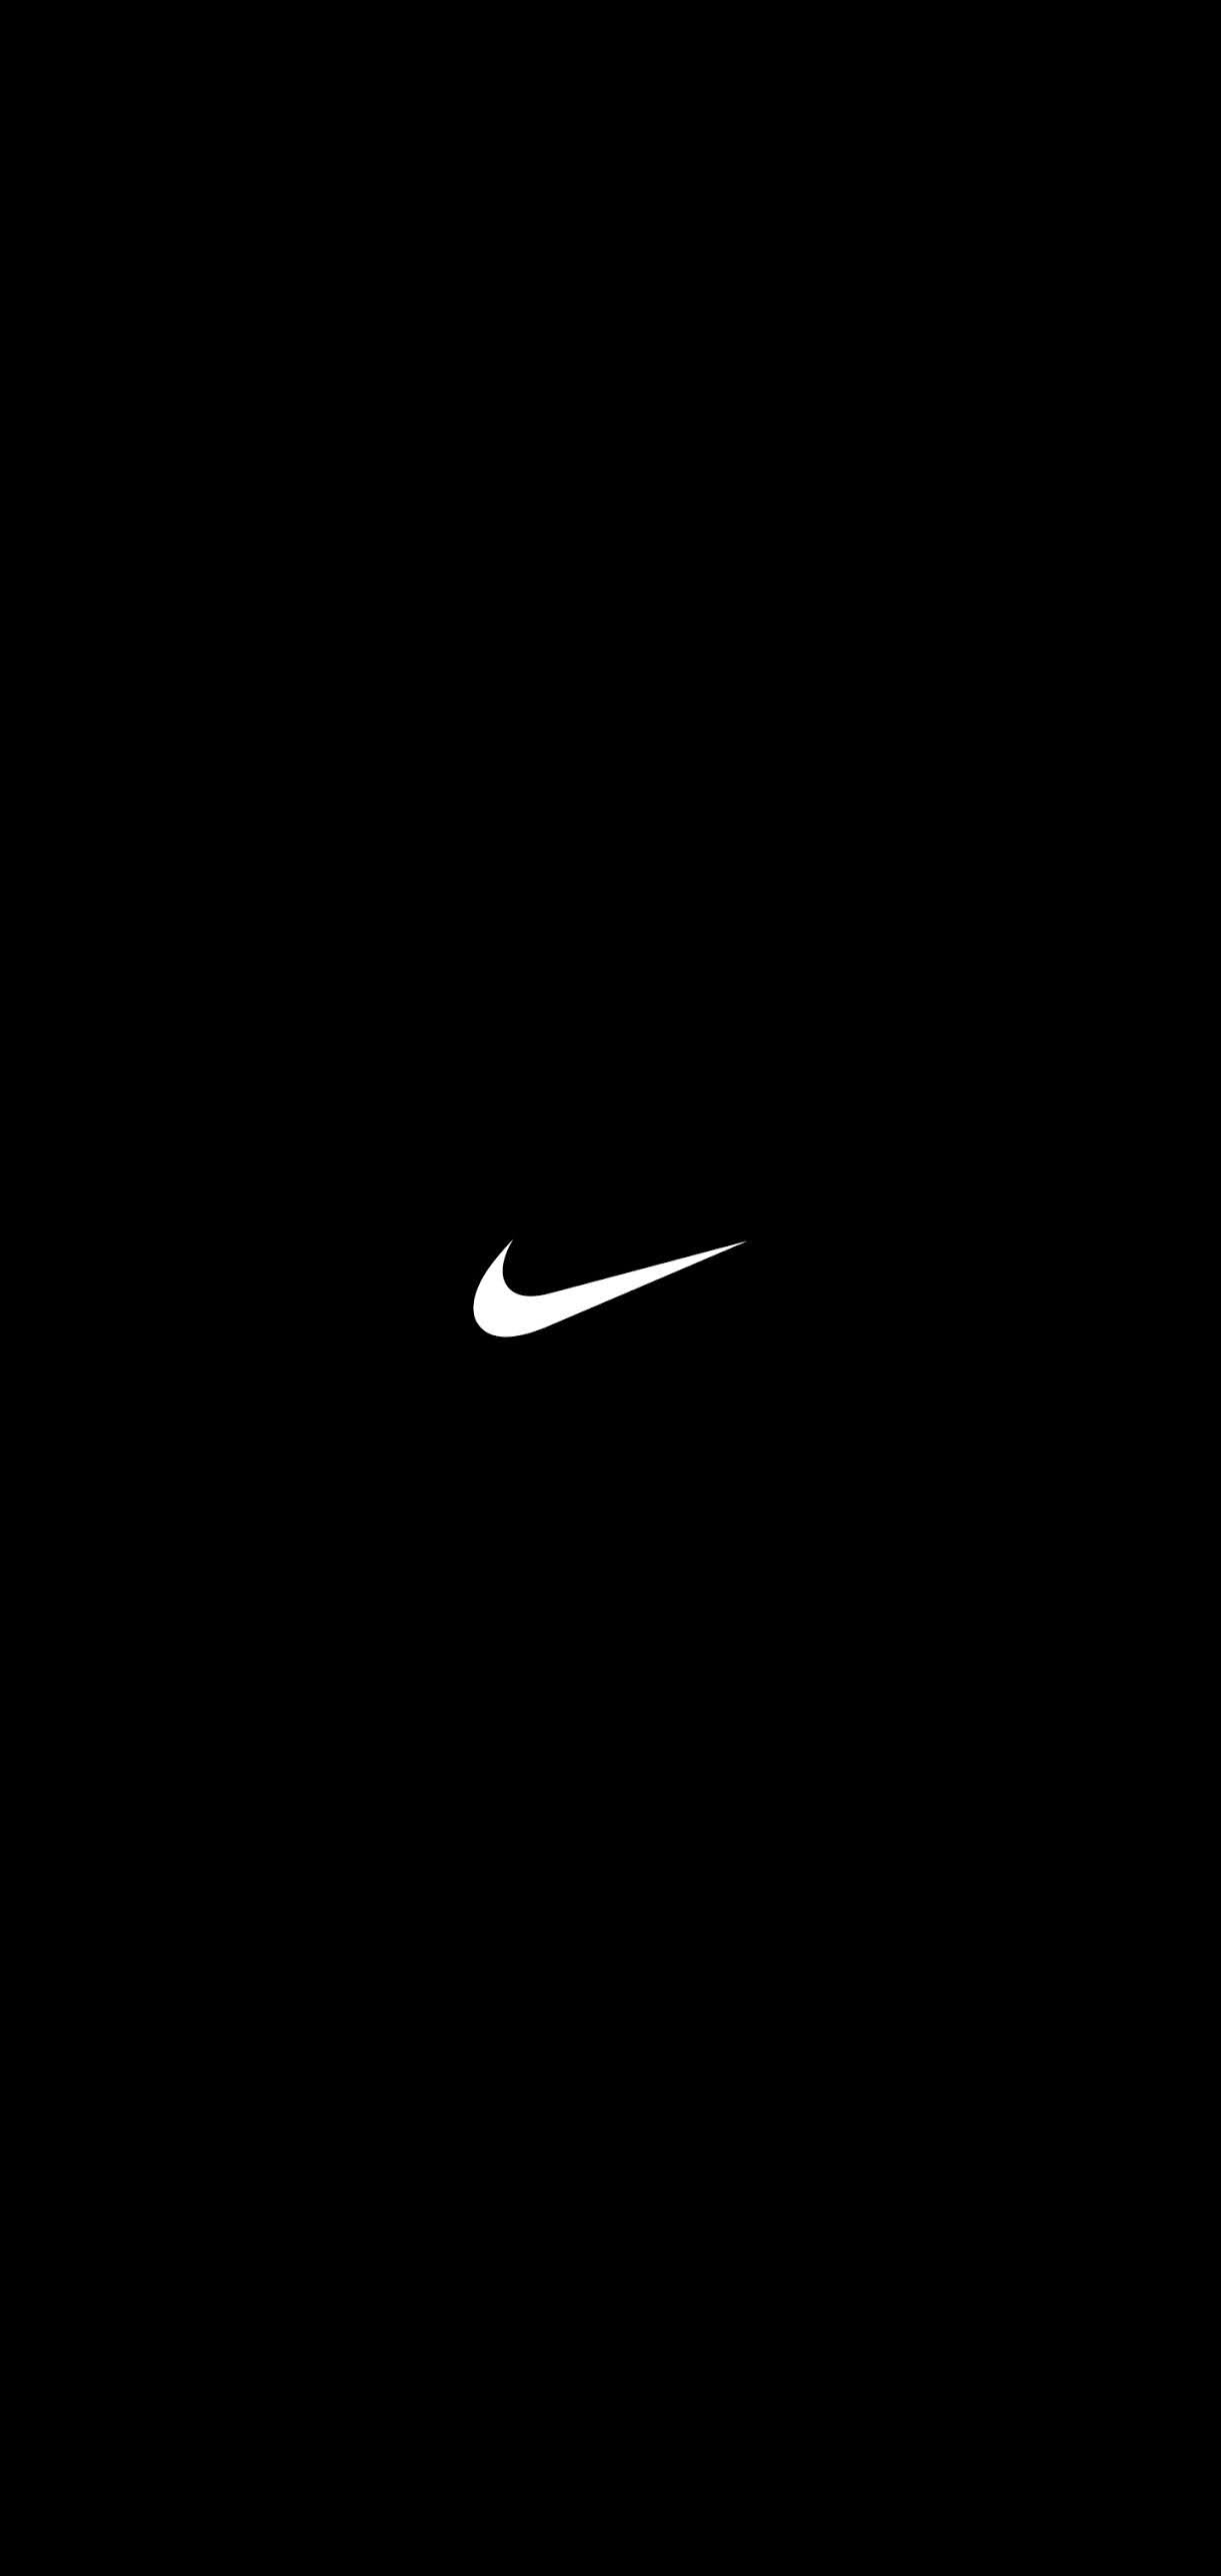 Discover 67+ black and white nike wallpaper super hot - in.cdgdbentre